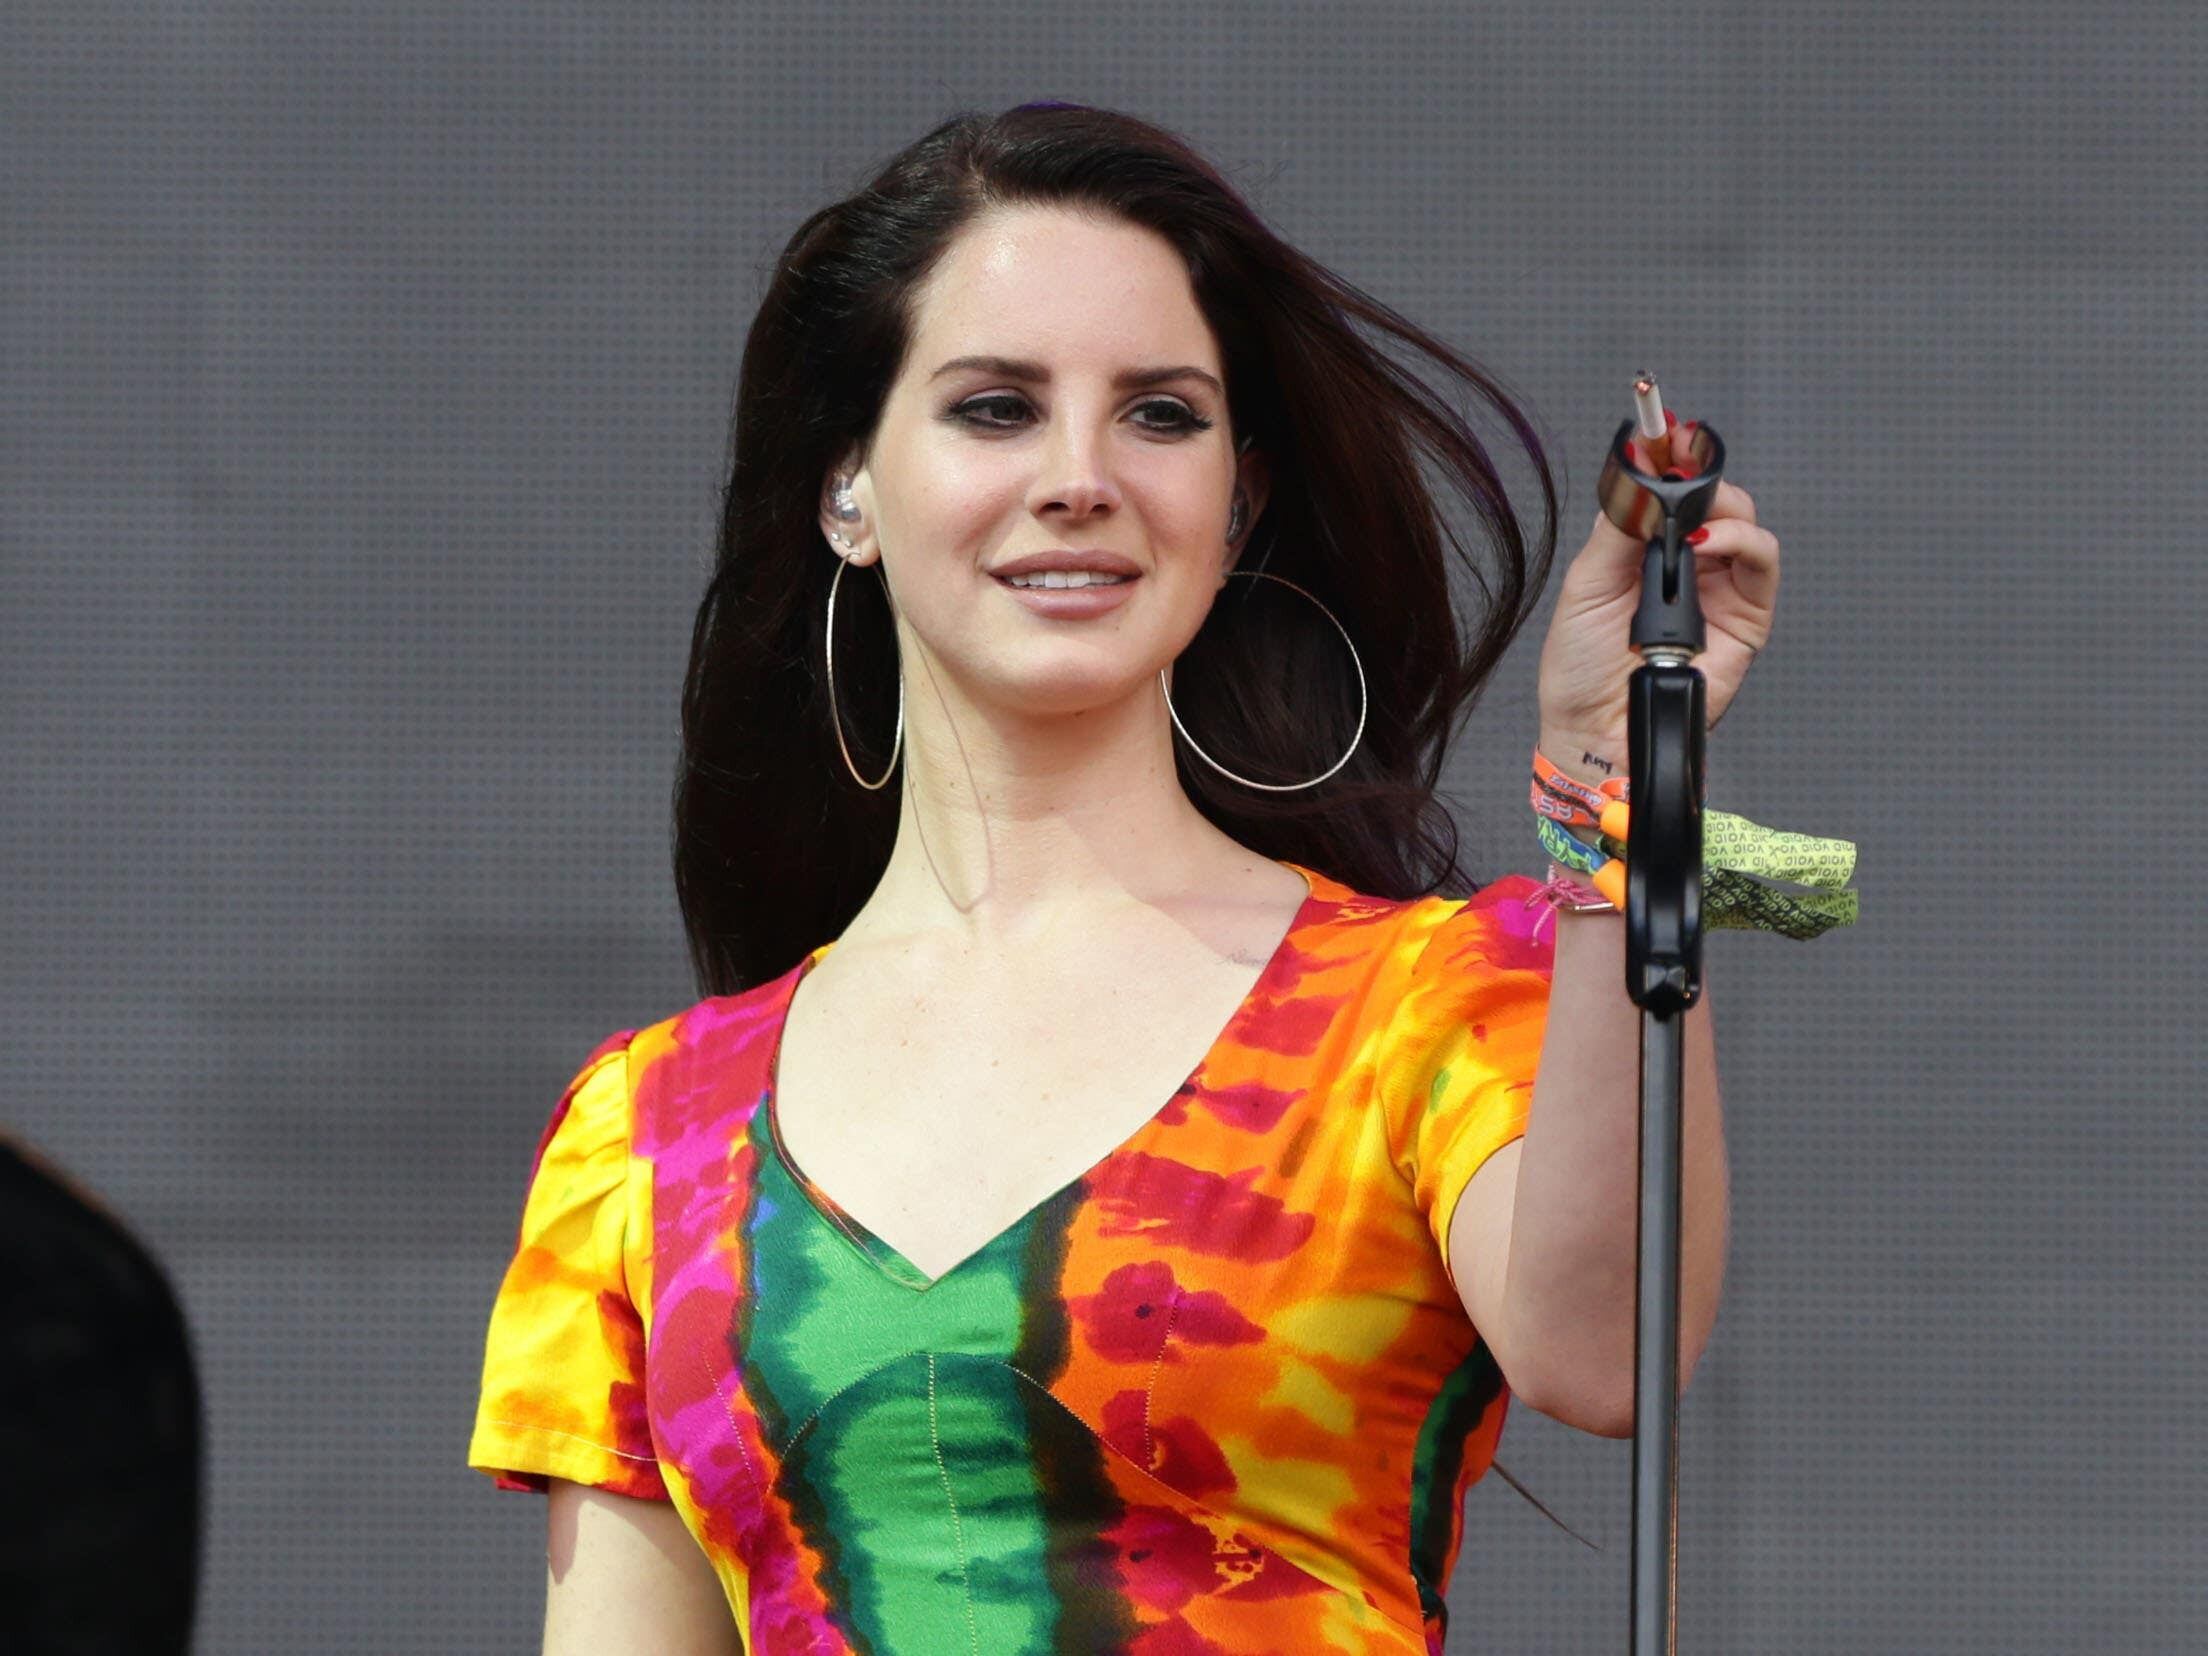 Lana Del Rey uses Ivor Novello award speech to call out relationship violence